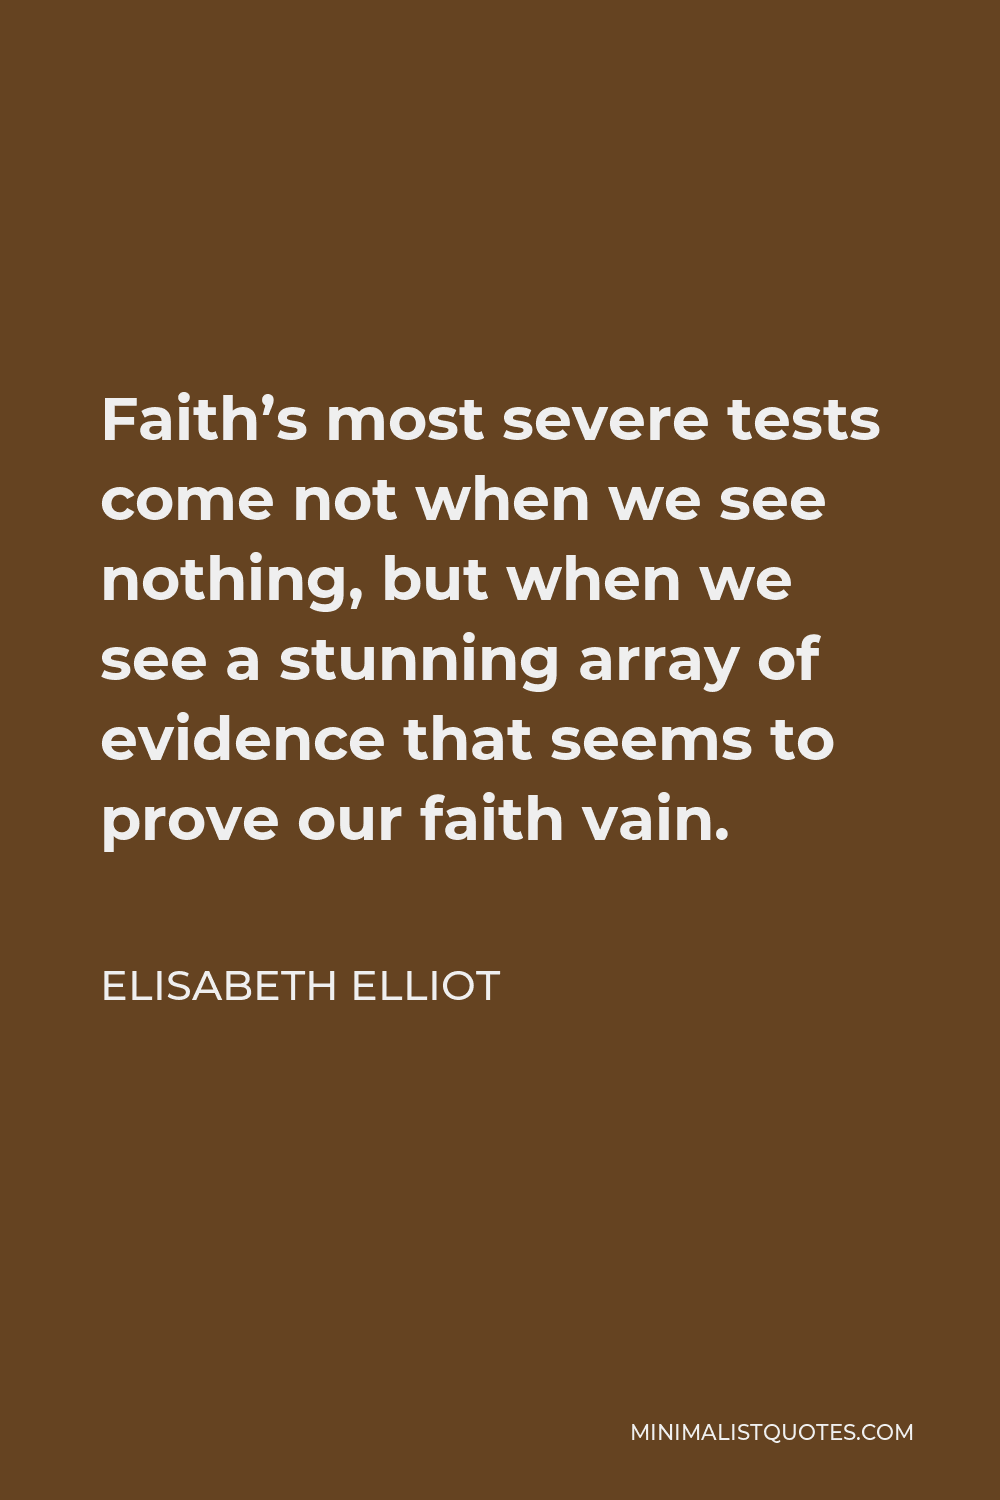 Elisabeth Elliot Quote - Faith’s most severe tests come not when we see nothing, but when we see a stunning array of evidence that seems to prove our faith vain.